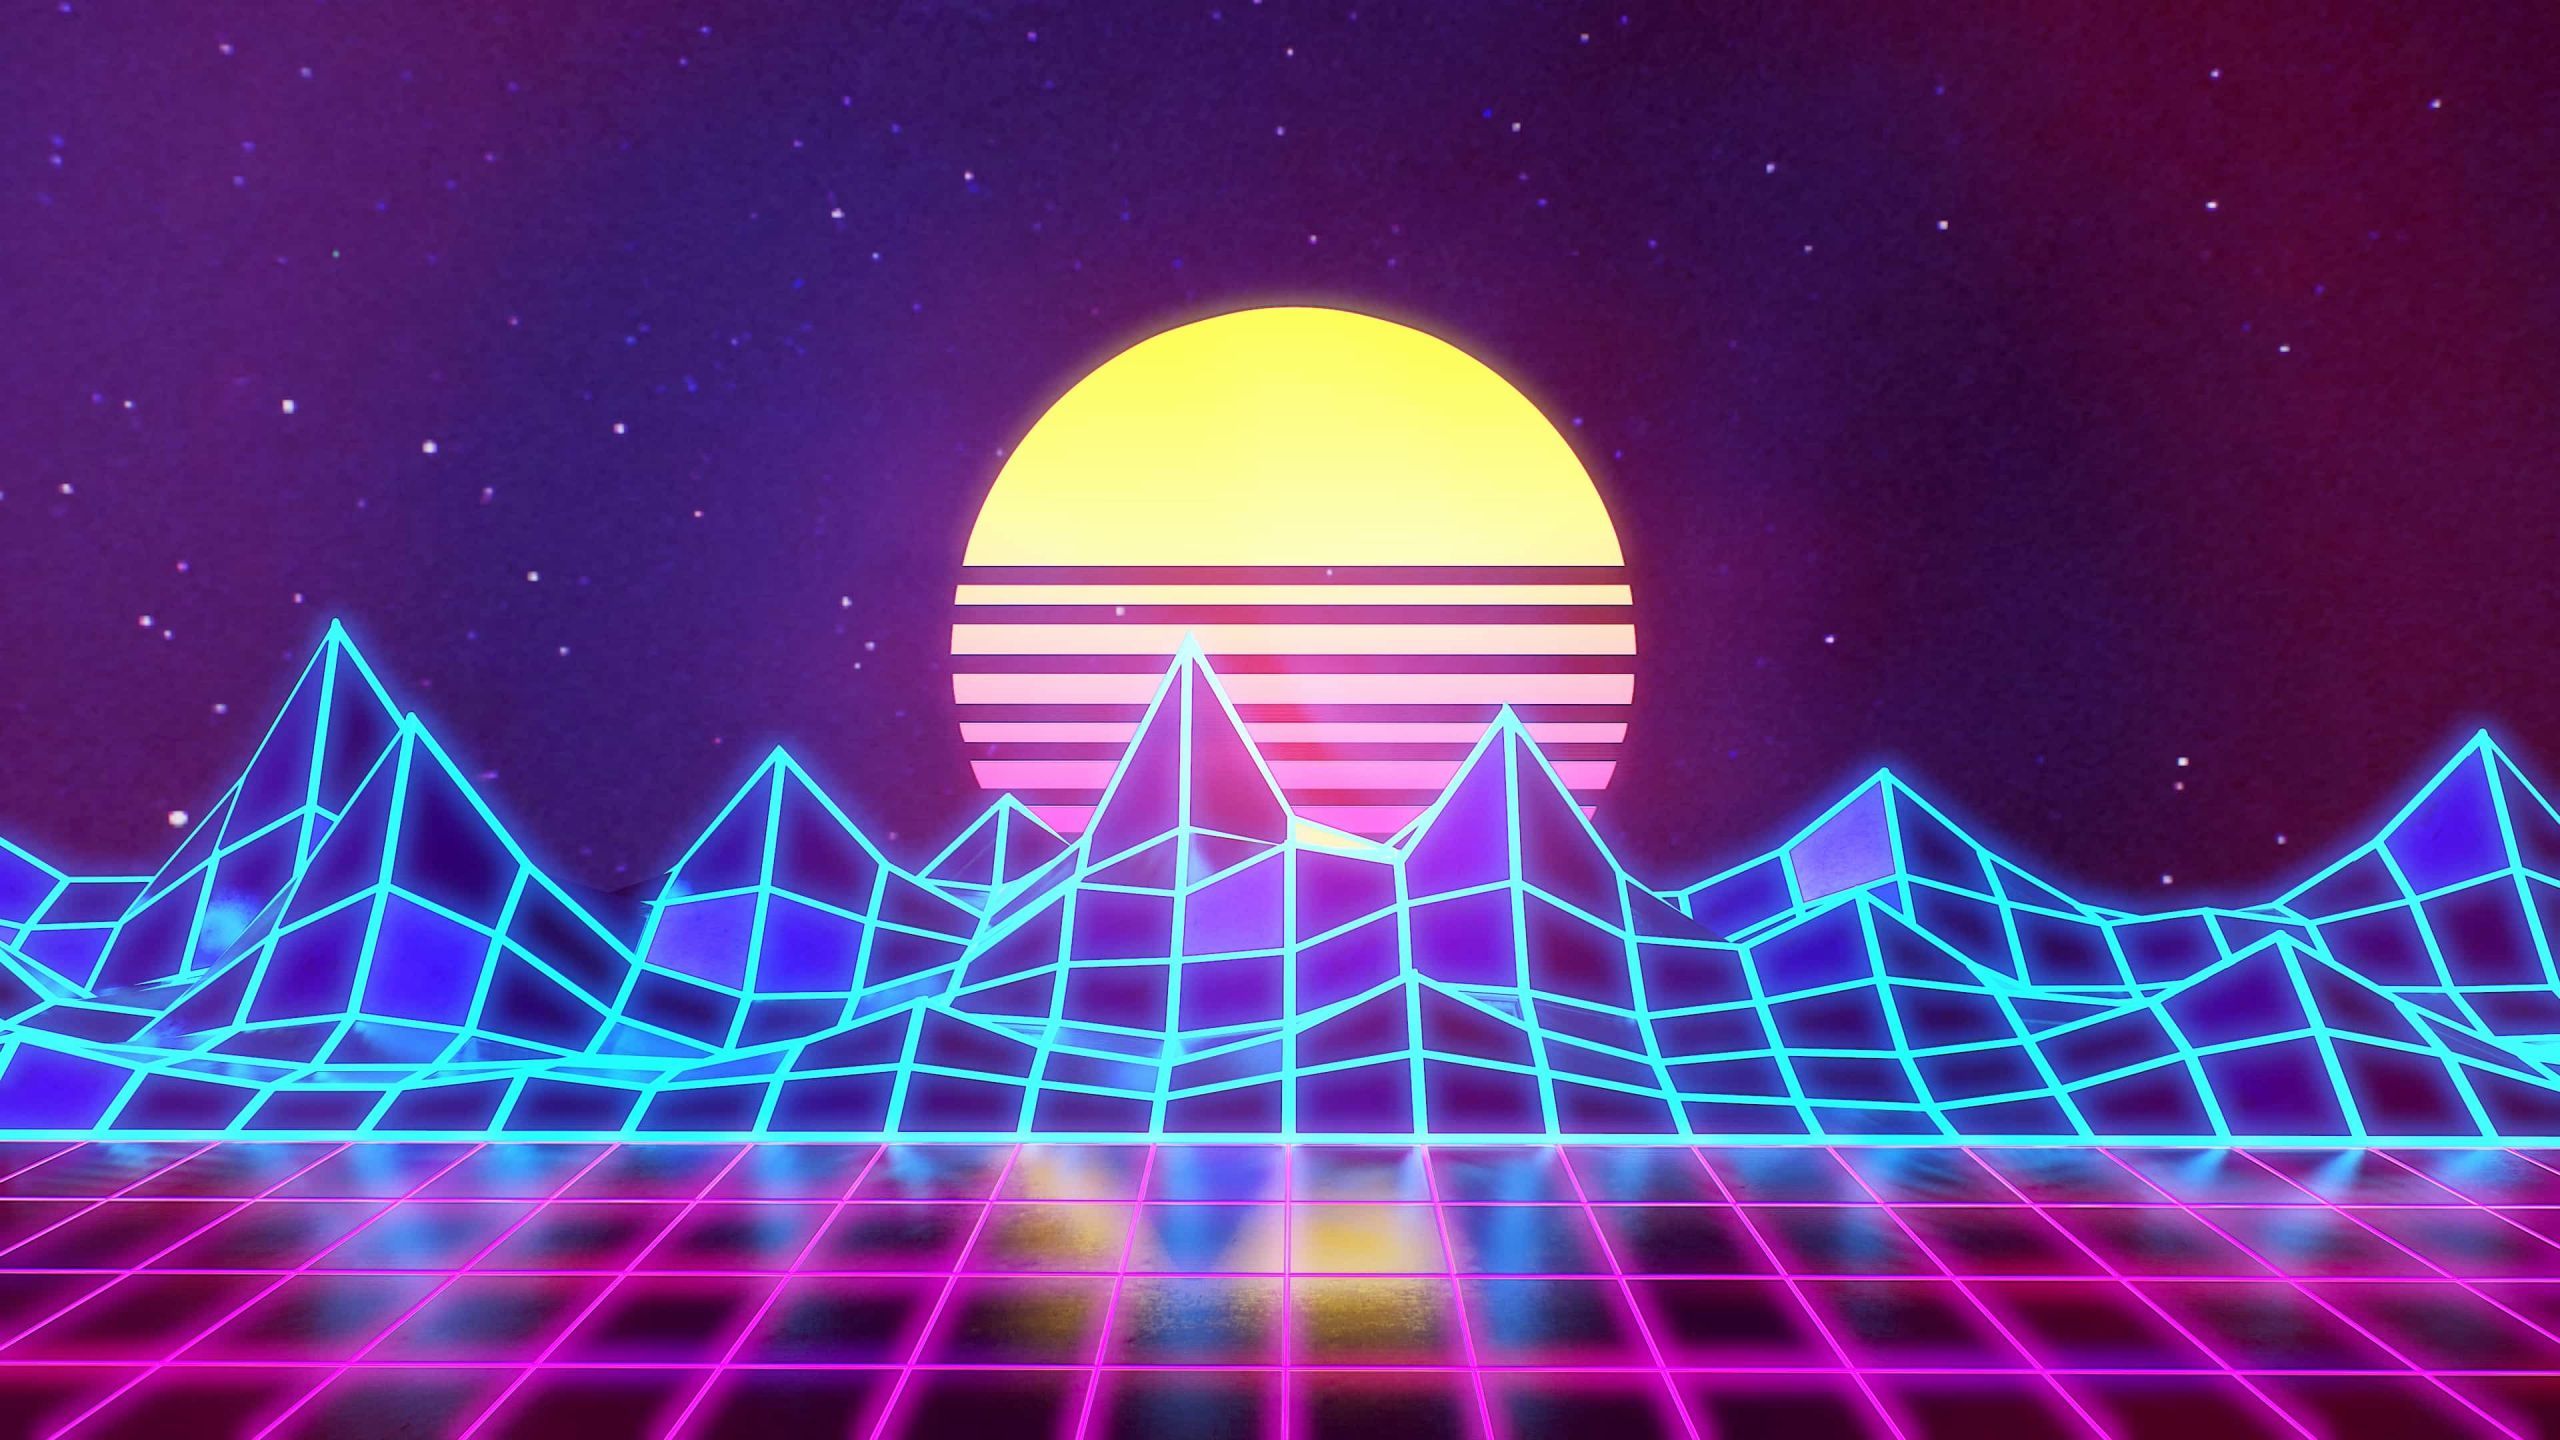 Retro 80s Wallpaper Luxury Retro Sunset by Oscar Chow Imaginarycolorscapes 2019 of The Hudson